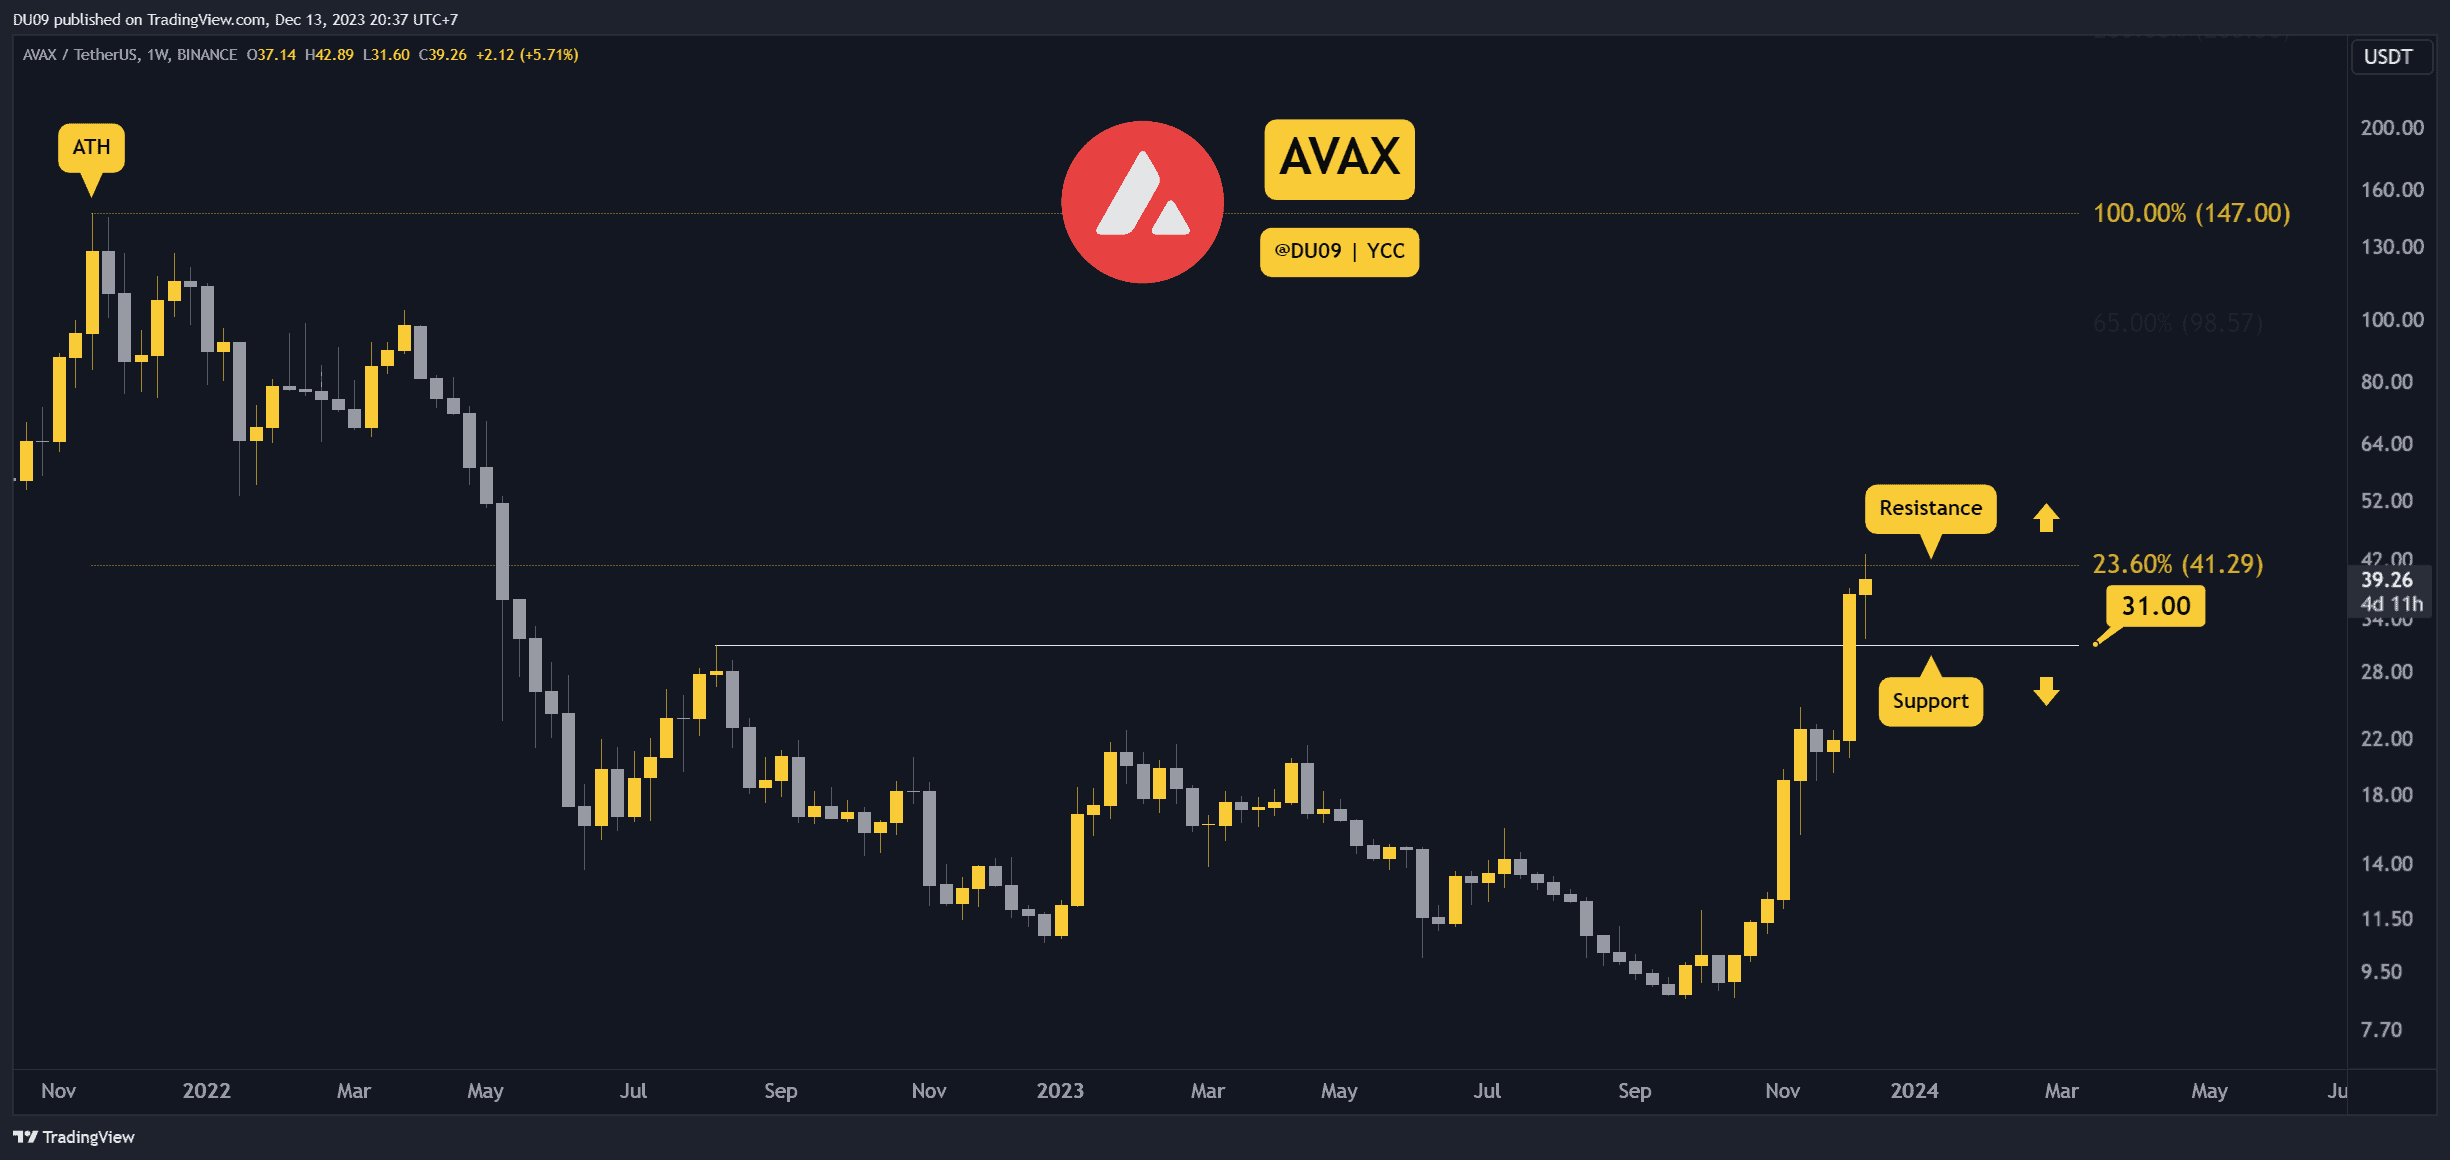 AVAX Skyrockets 50% Weekly, is $40 About to Fall? (Avalanche Price Analysis)